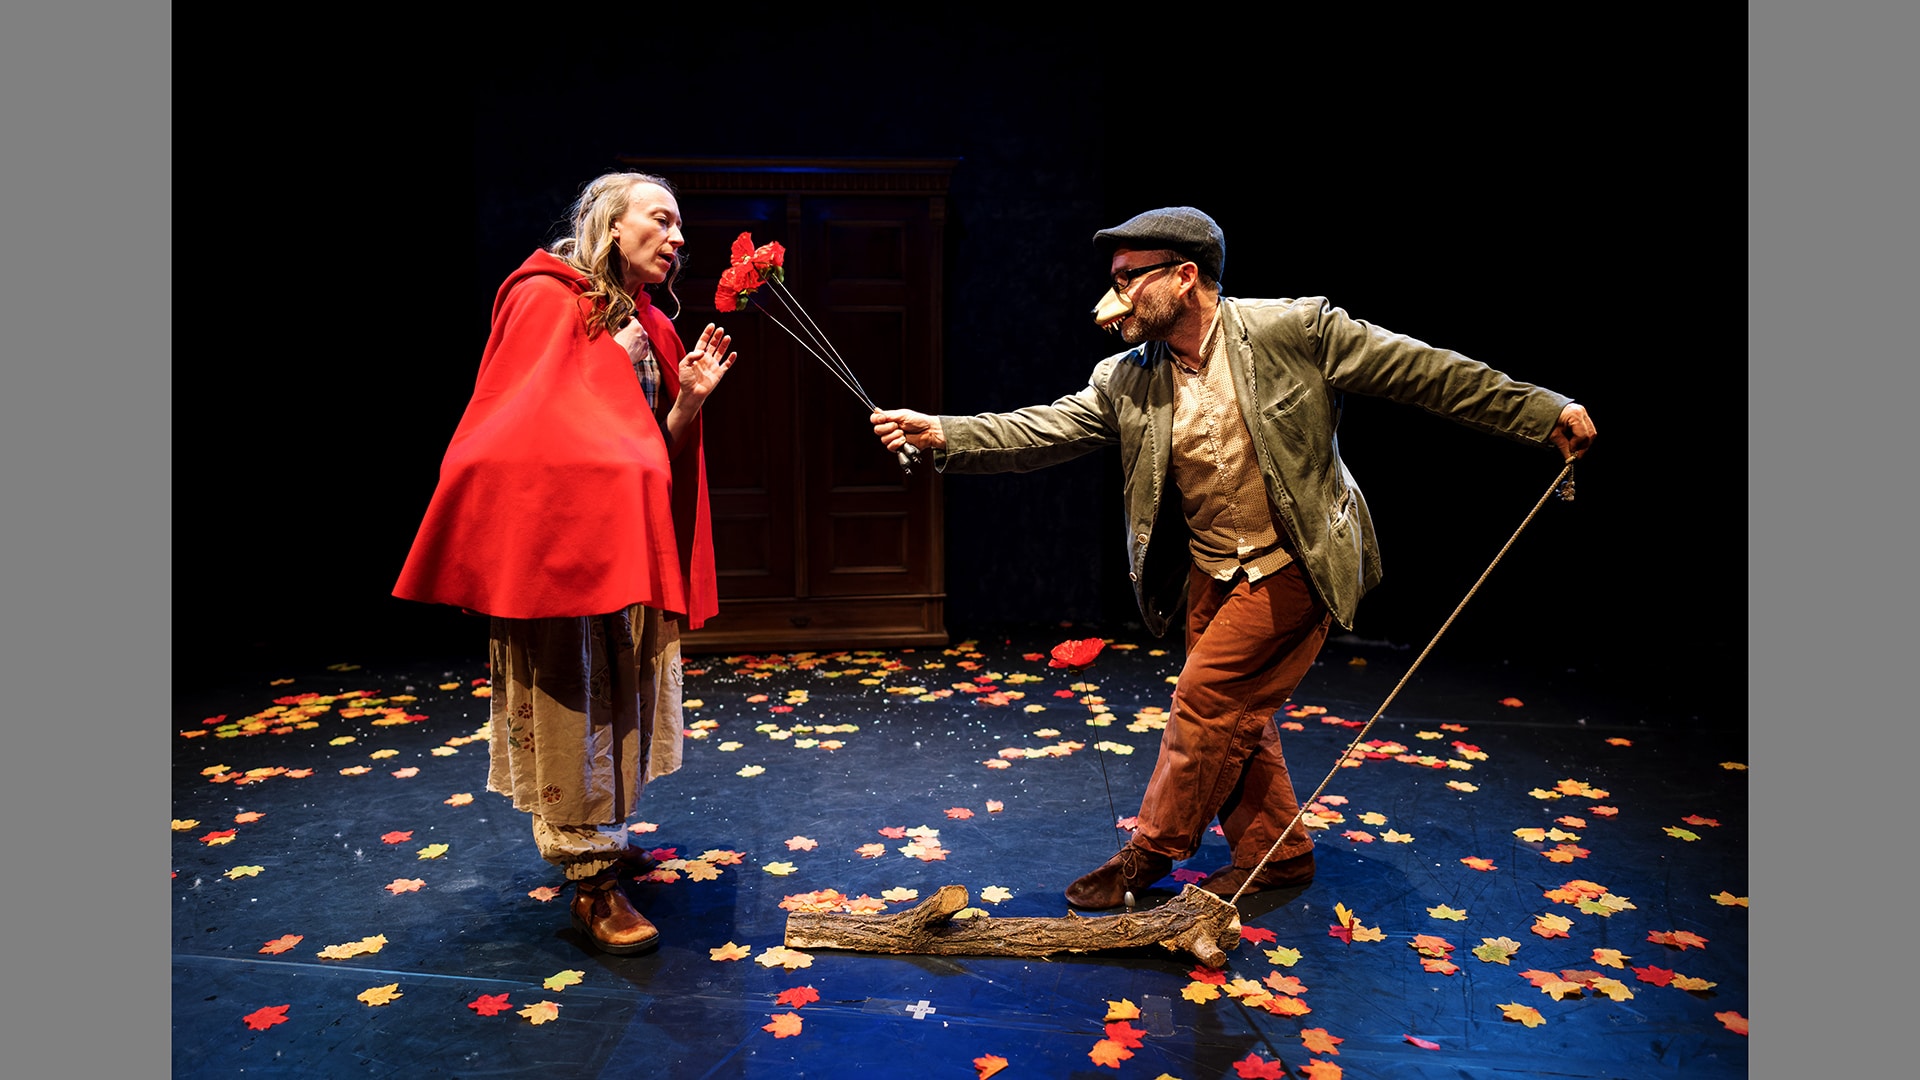 A man wearing a green jacket and flatcap offers a bouquet of red flowers to a woman wearing a red cloak